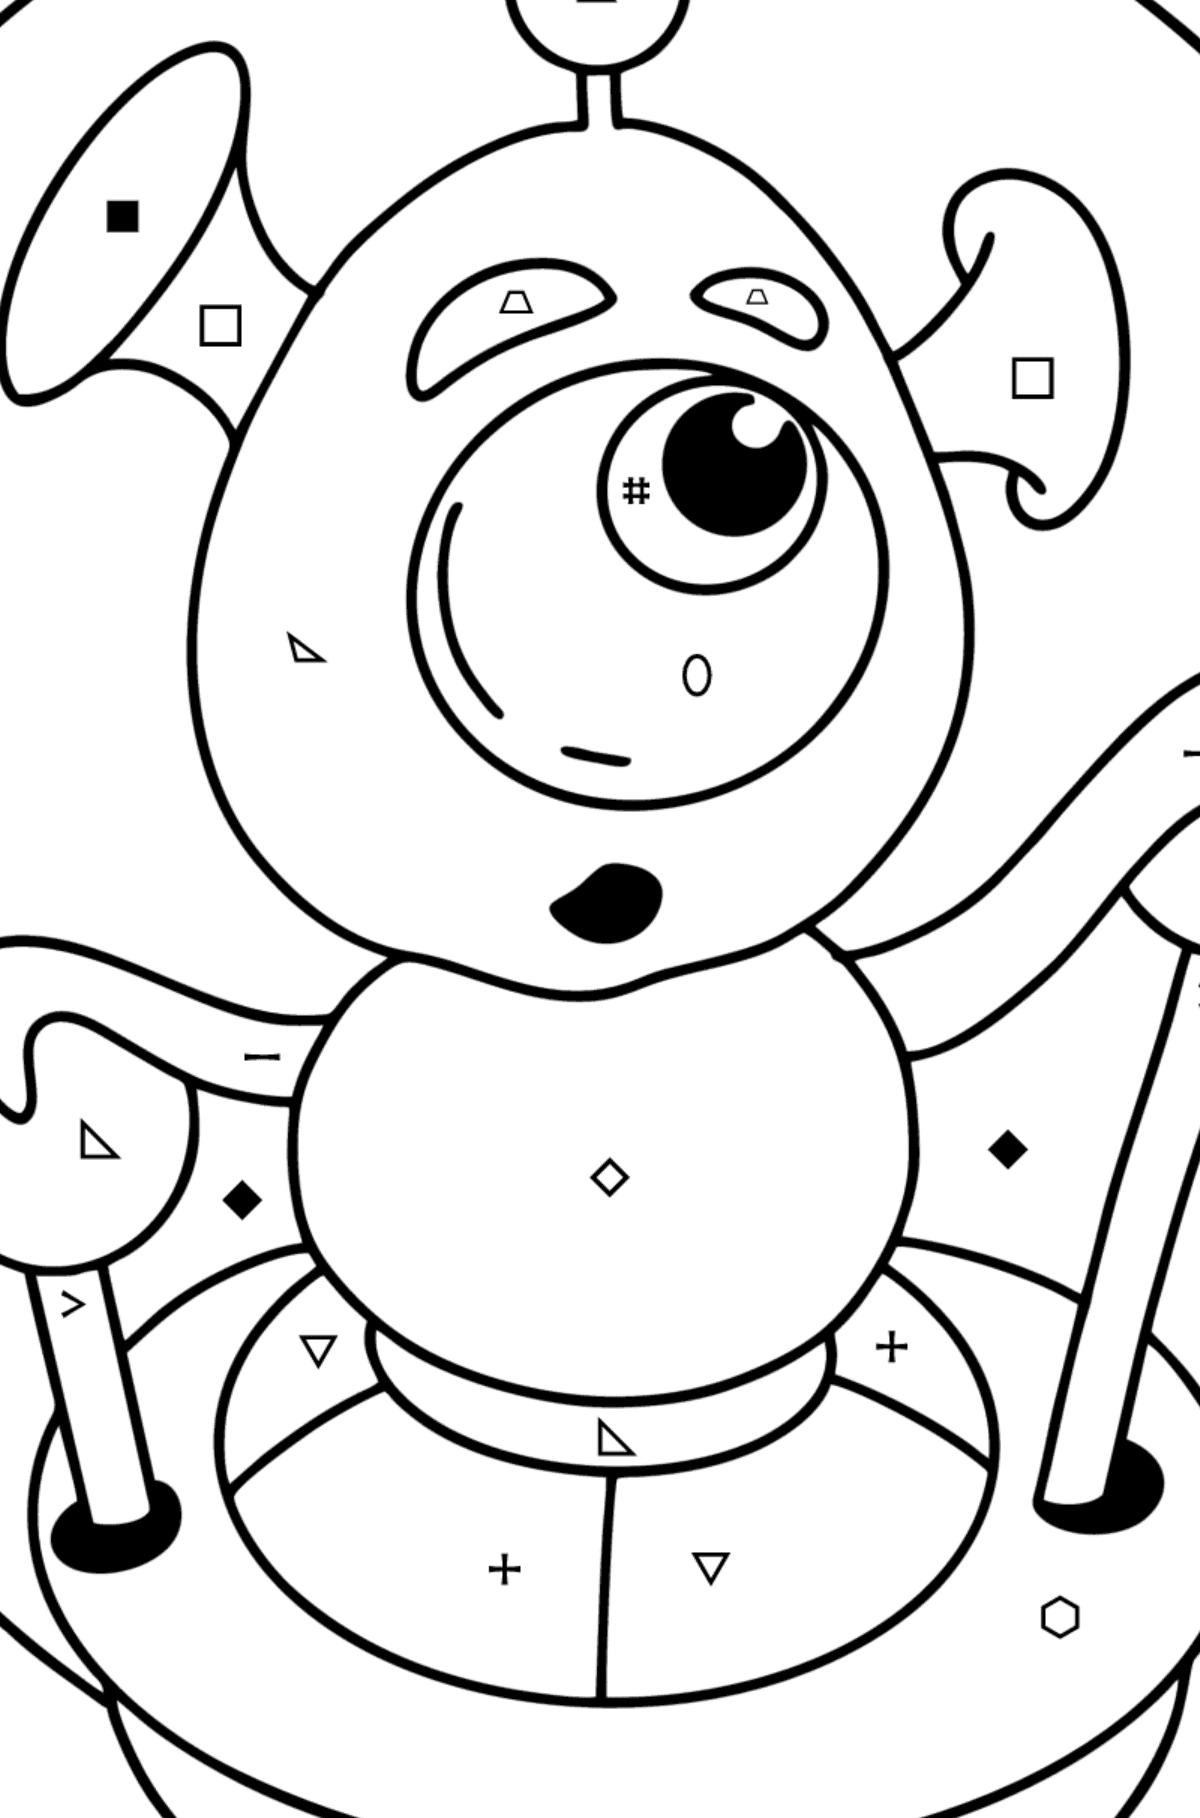 Baby Alien coloring pages - Coloring by Symbols and Geometric Shapes for Kids